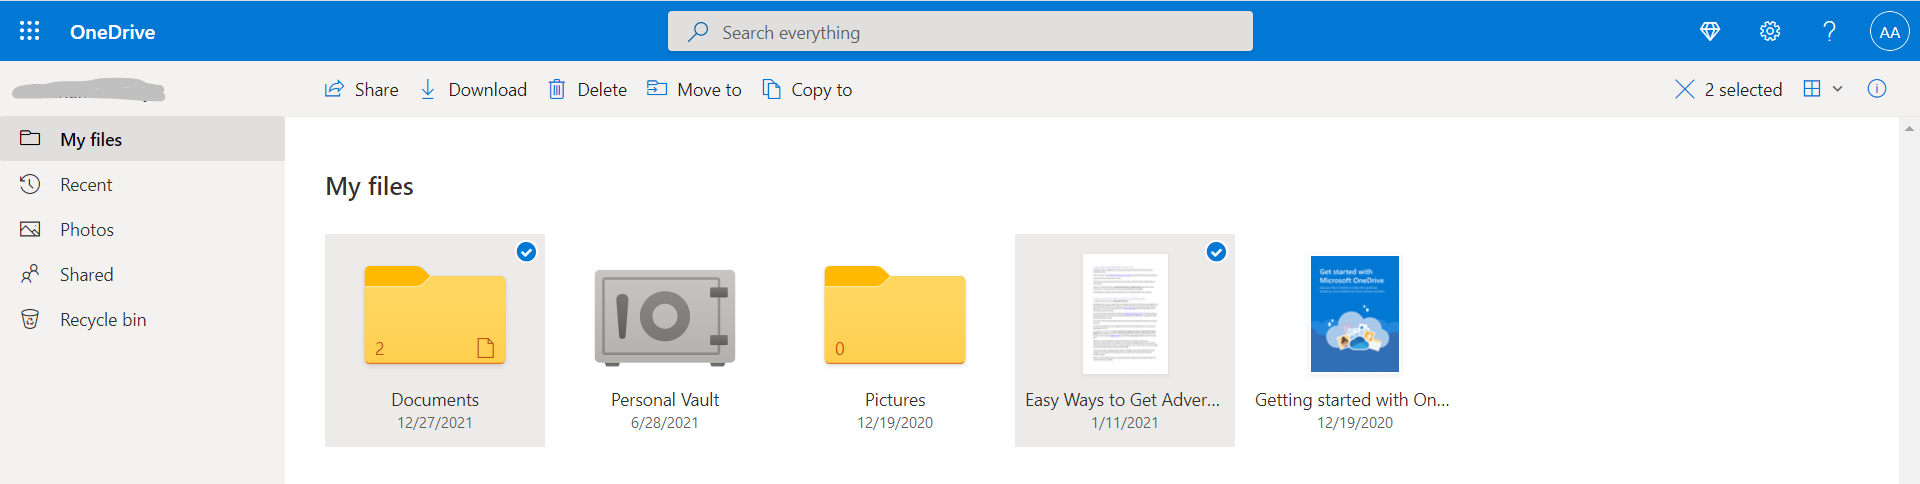 deleting files from onedrive online